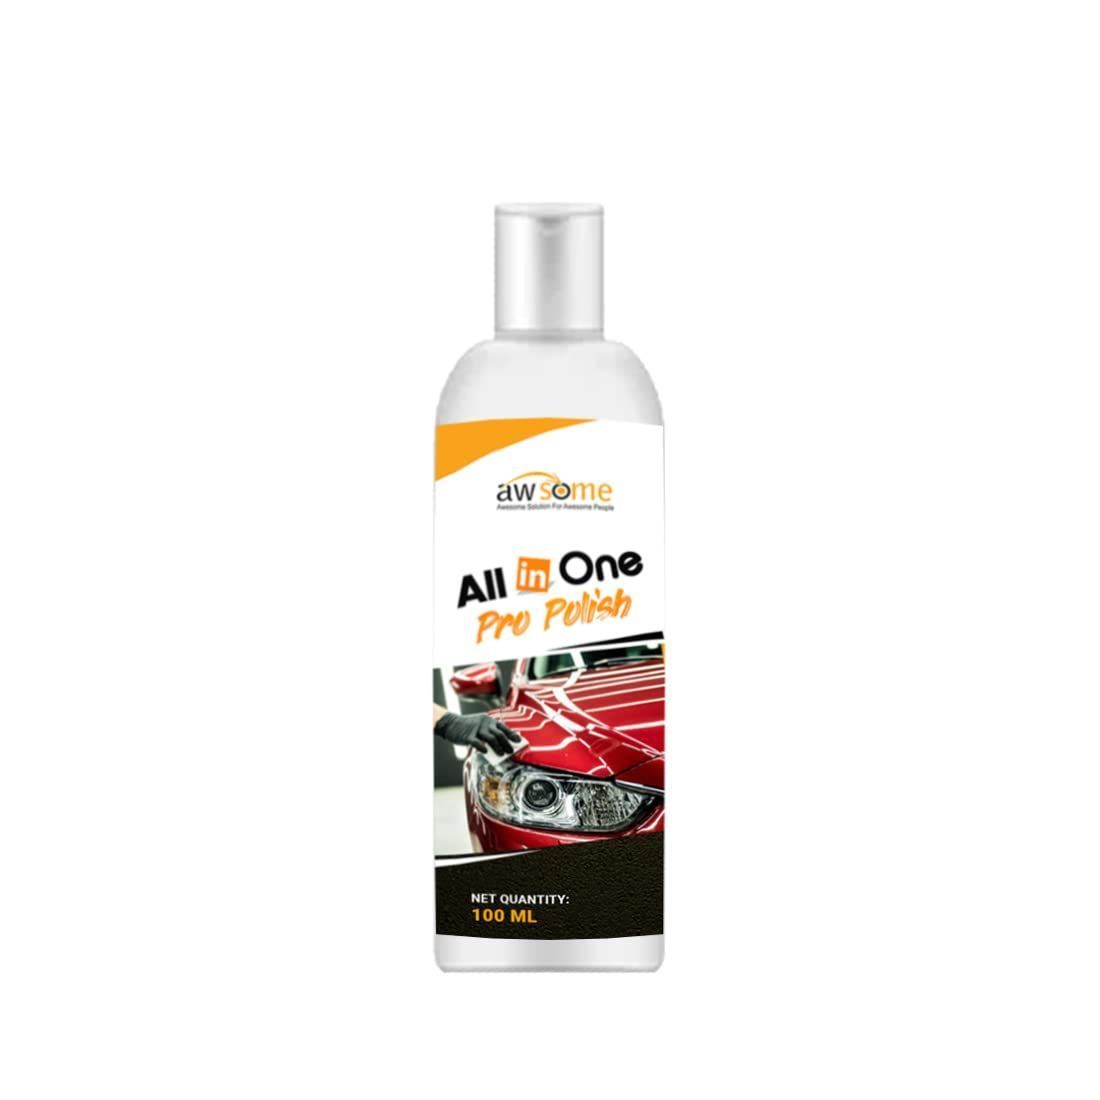 Awsome All In One pro Polish For Car And Bike